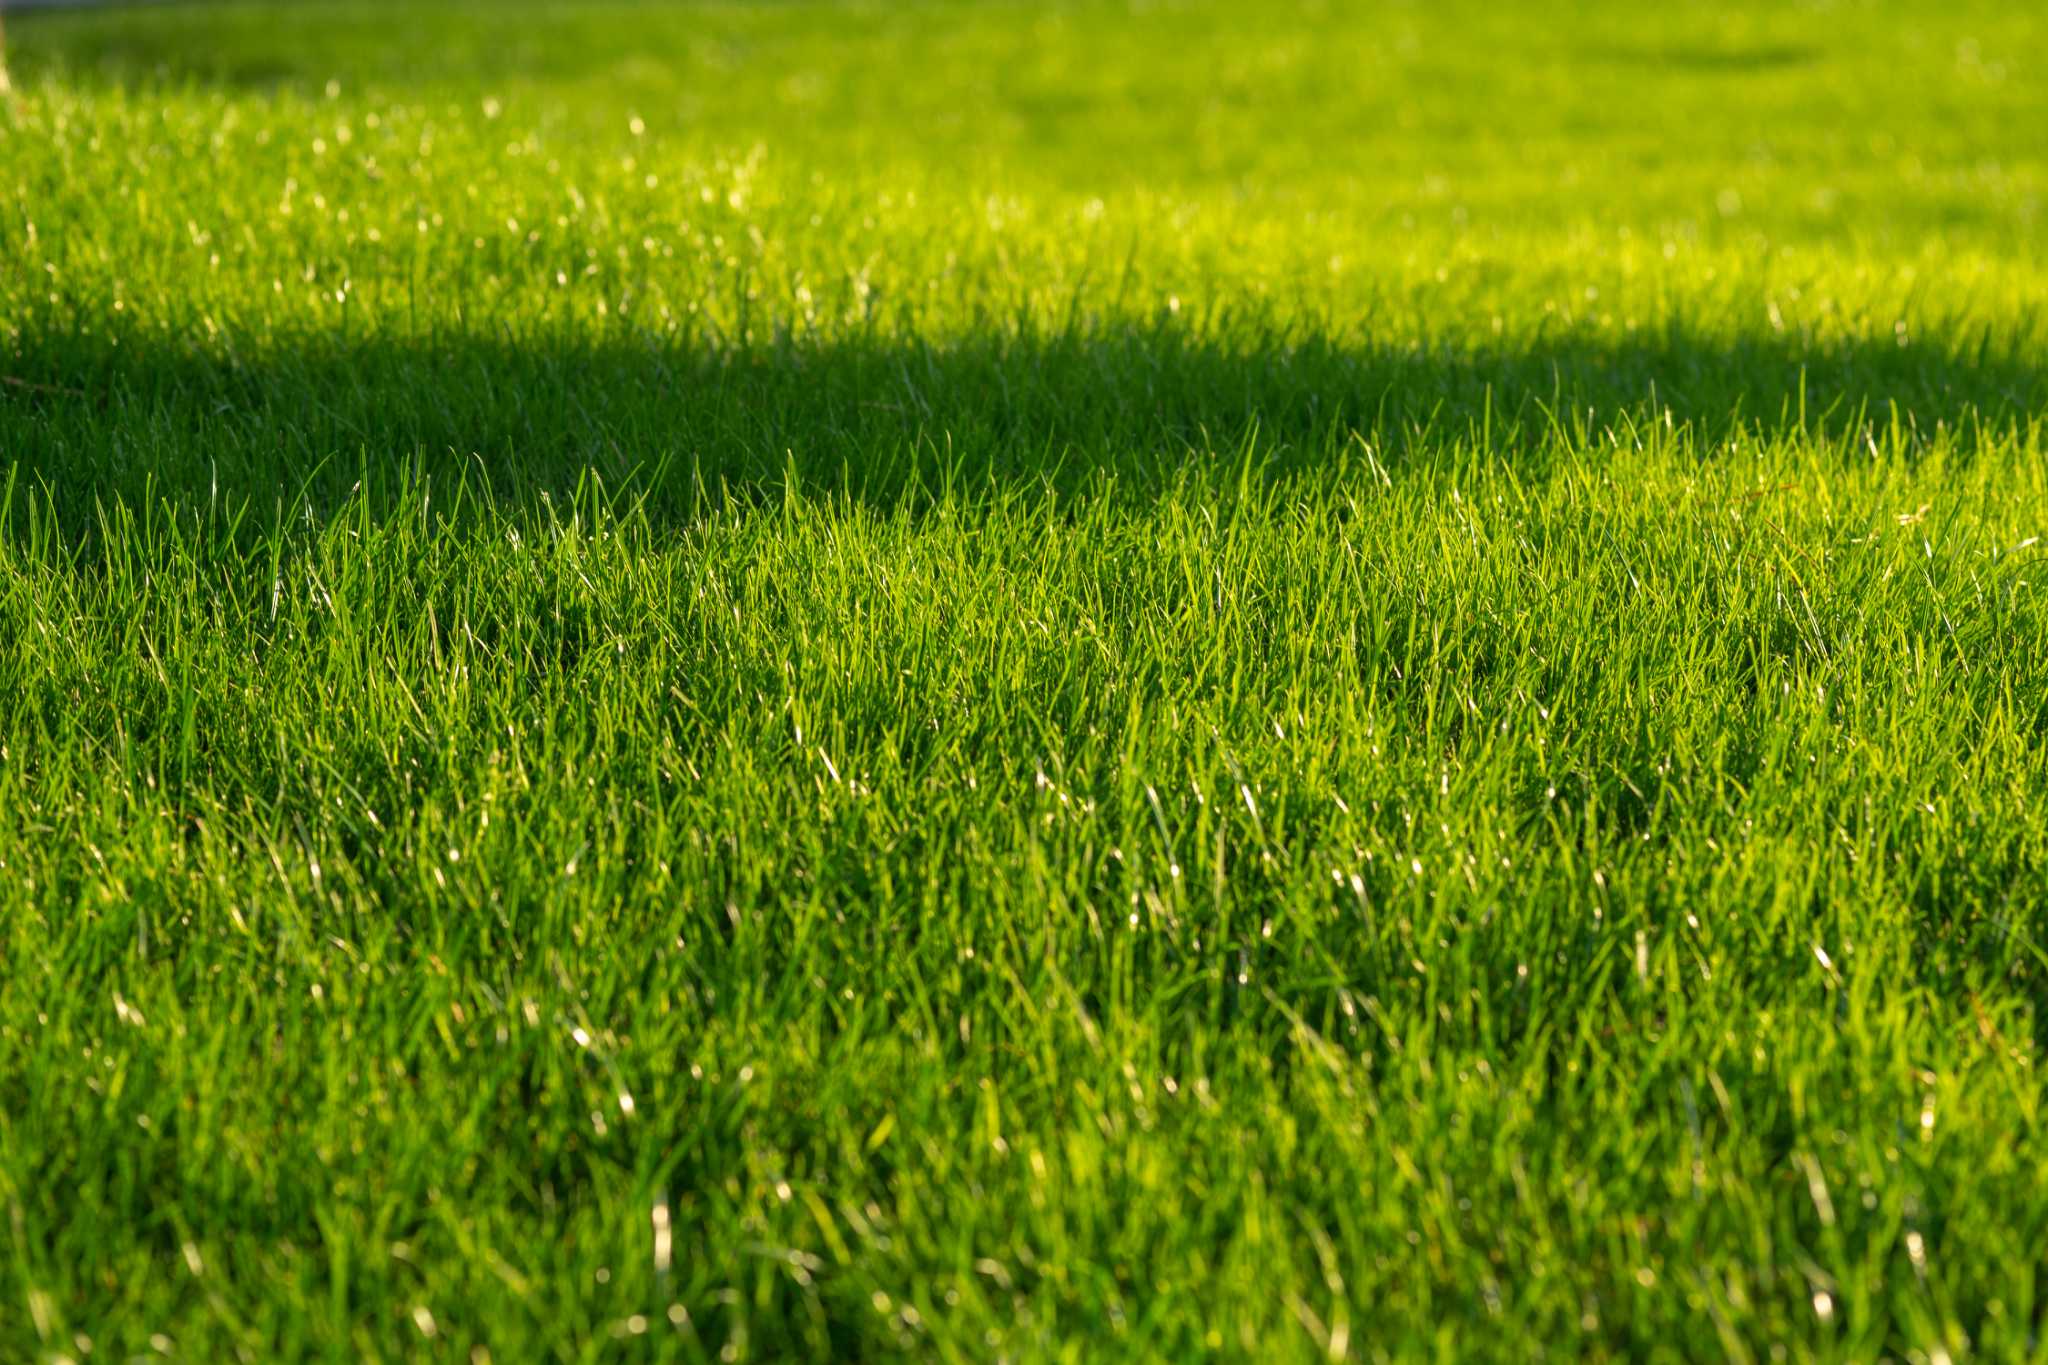 How to Aerate Your Lawn Without Machines